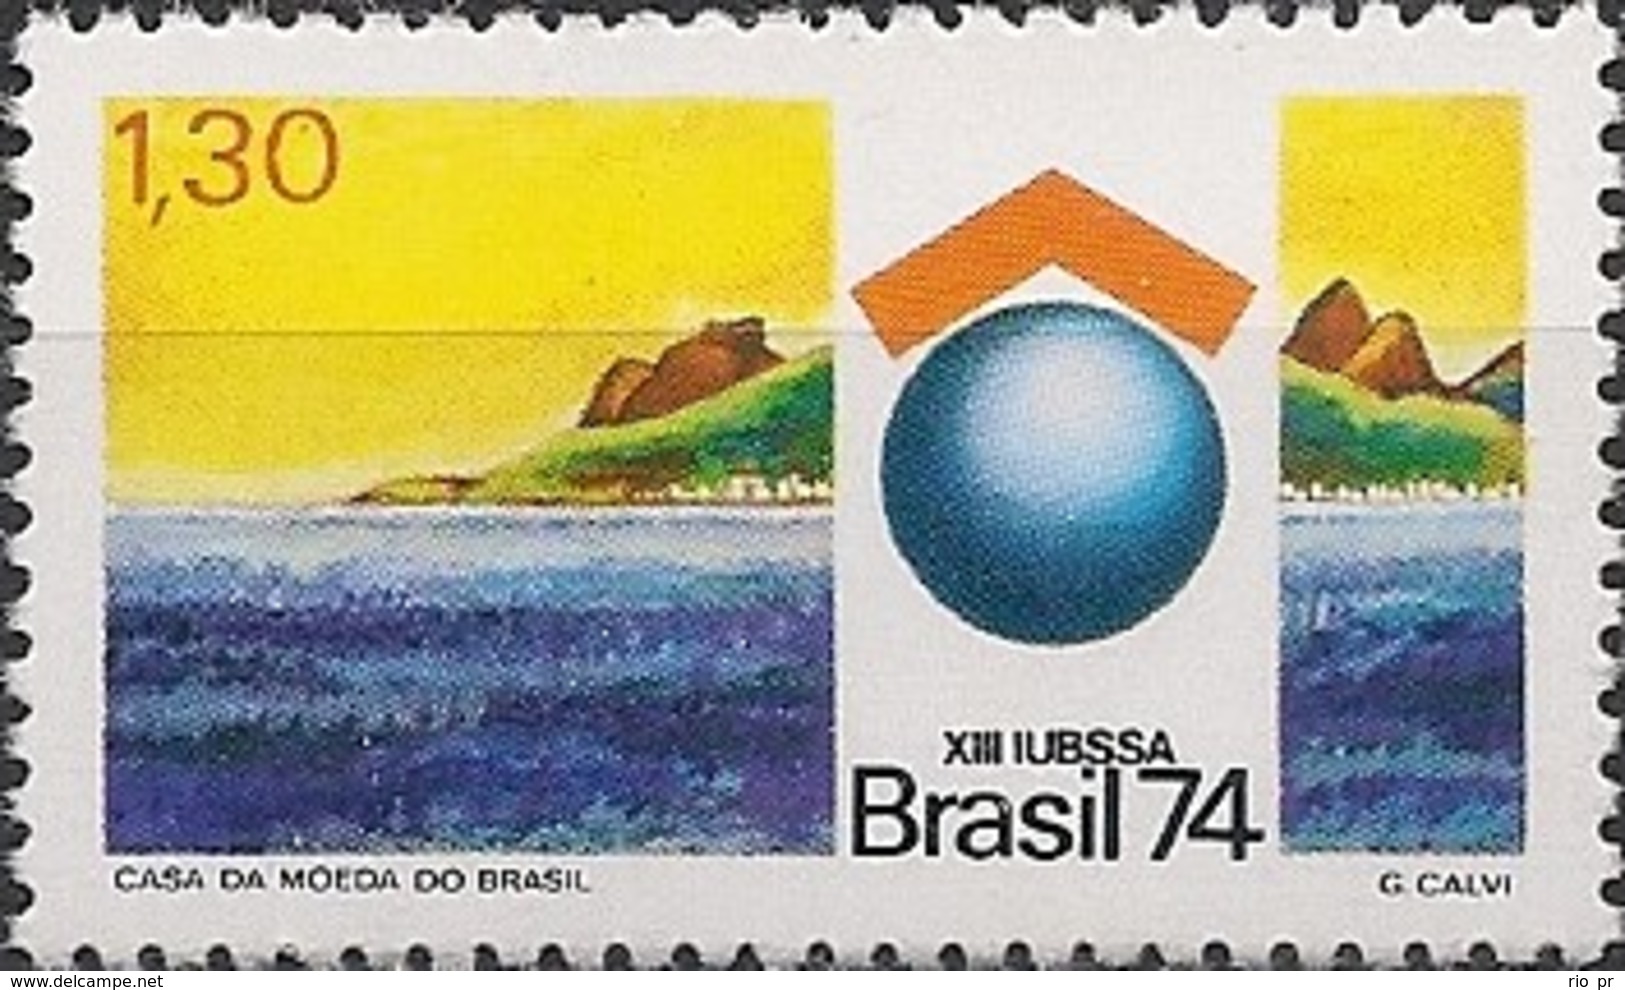 BRAZIL - 13th CONGRESS OF THE INTERNATIONAL UNION OF BUILDINGS AND SAVING SOCIETIES 1974 - MNH - Neufs